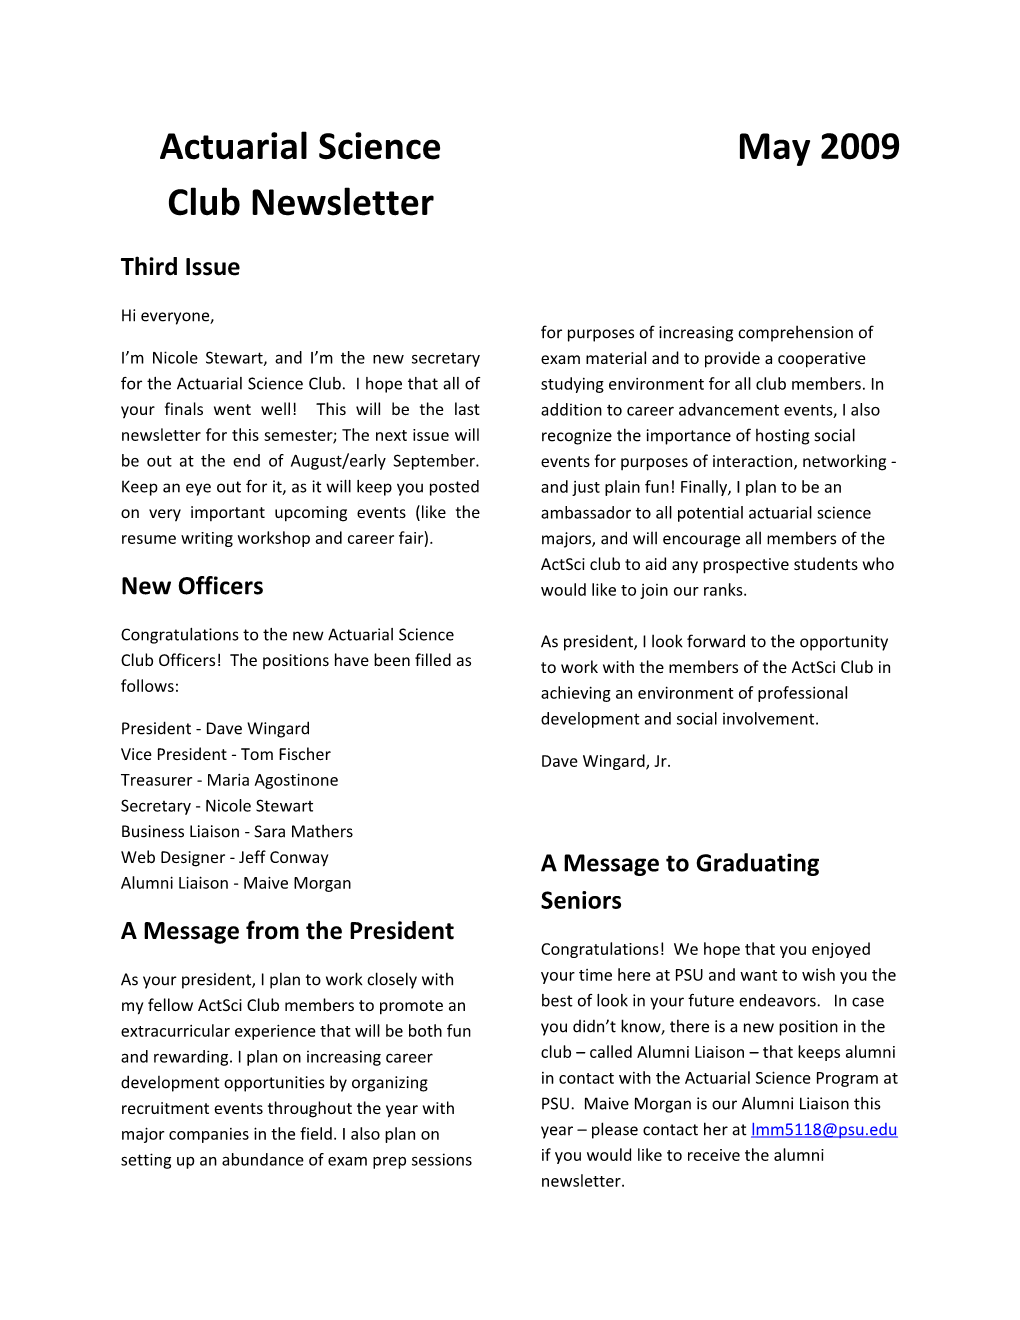 Actuarial Science Club Newsletter